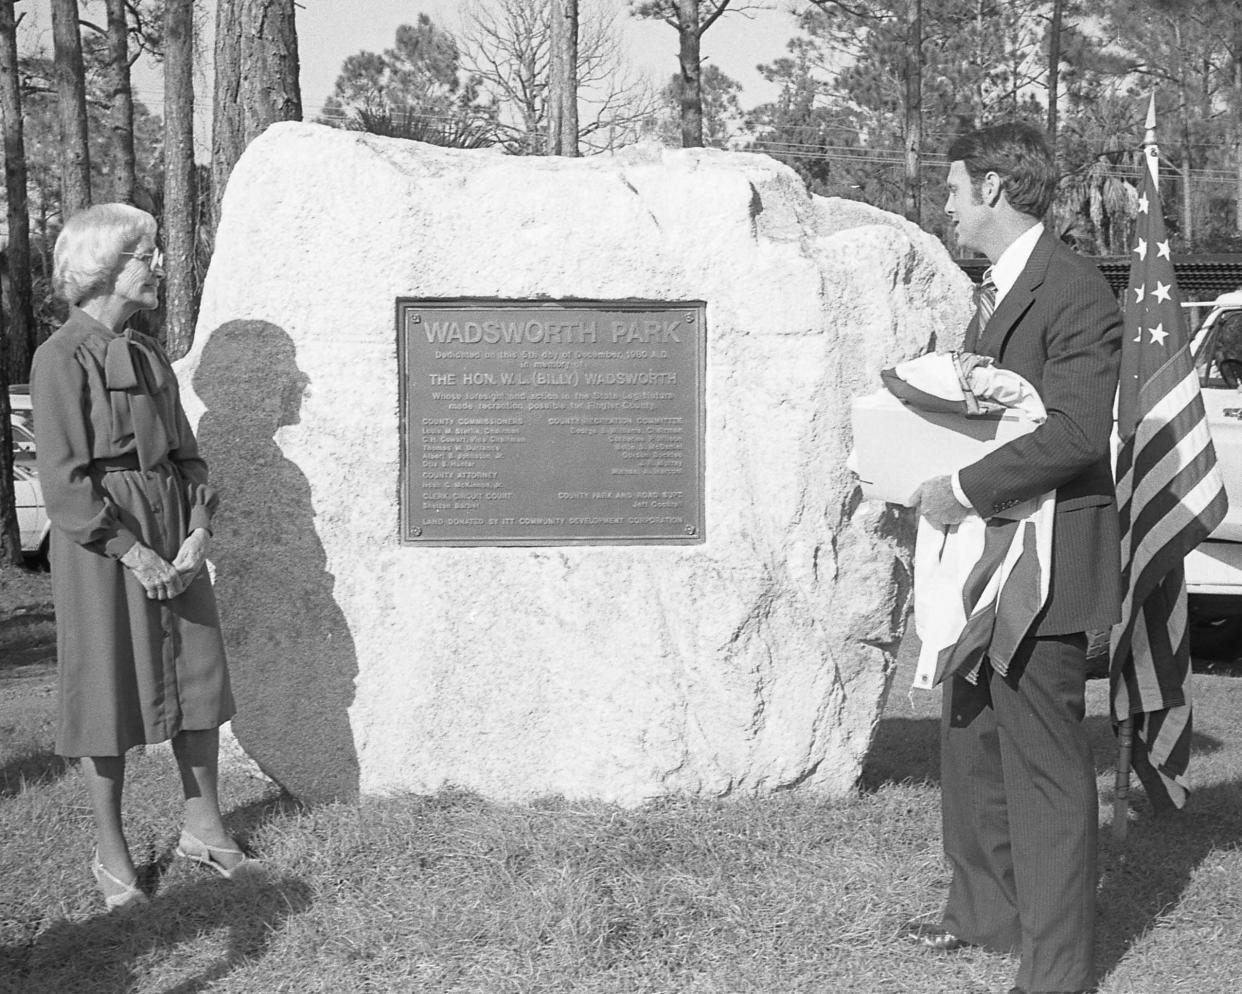 Frances Wadsworth, the widow of Billy Wadsworth, and Circuit Judge Kim Hammond, unveil the plaque at Wadsworth Park on Dec. 5, 1980, at the dedication of the park.